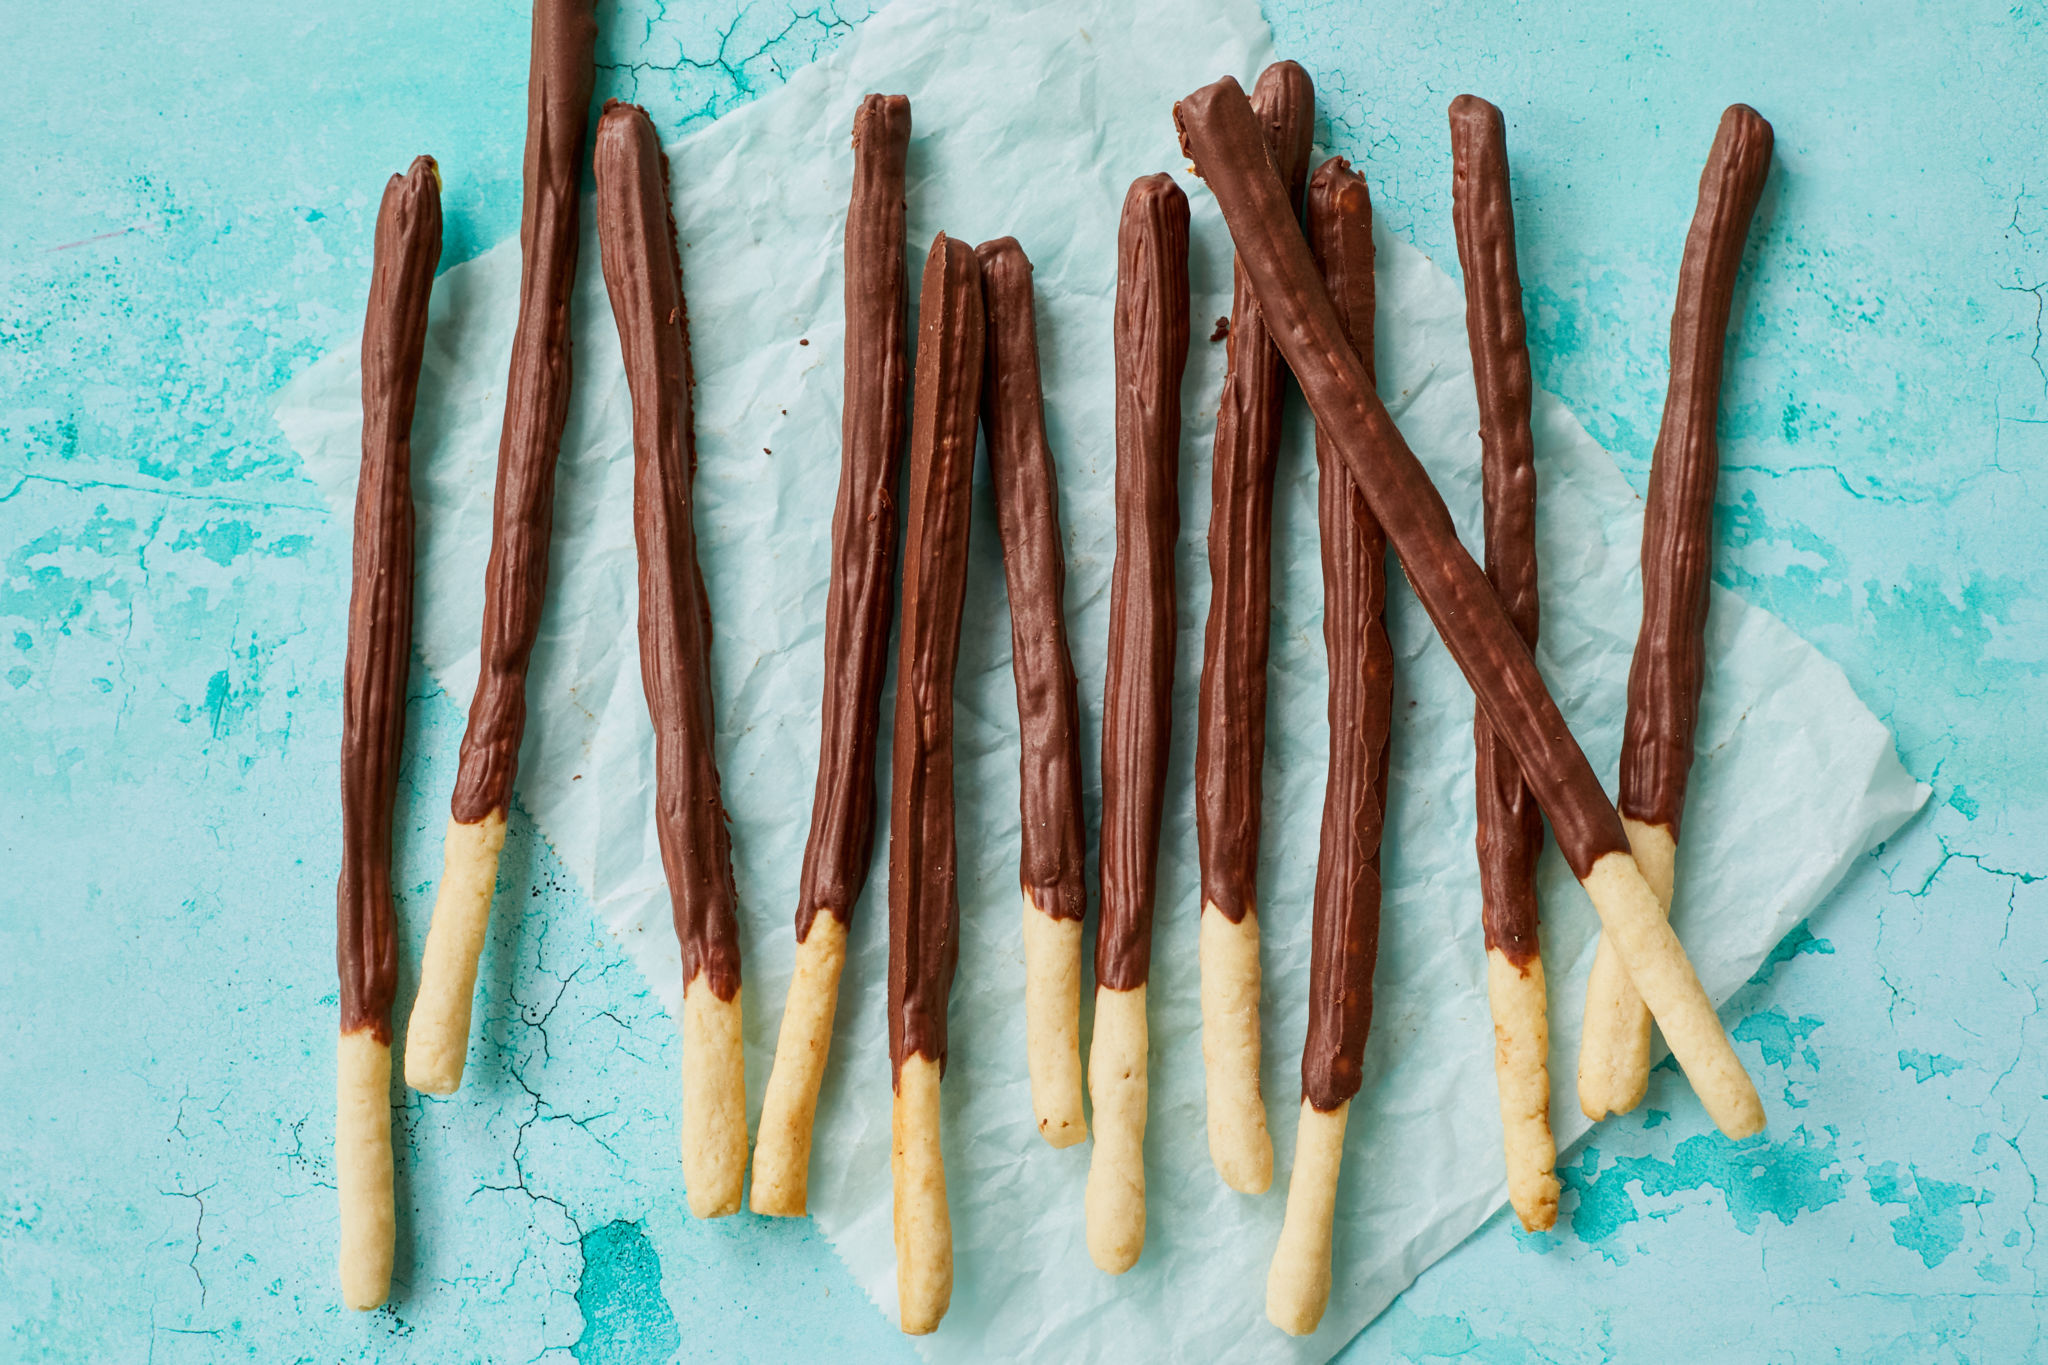 Homemade Pocky sticks are in a thin elongated-stick shape, with most of the stick covered in a chocolate-flavored coating while leaving a small section uncoated for easy handling. The cookies are placed in a glass Ball mason jar with a light teal background. On Pocky biscuit is being taken out of the jar.